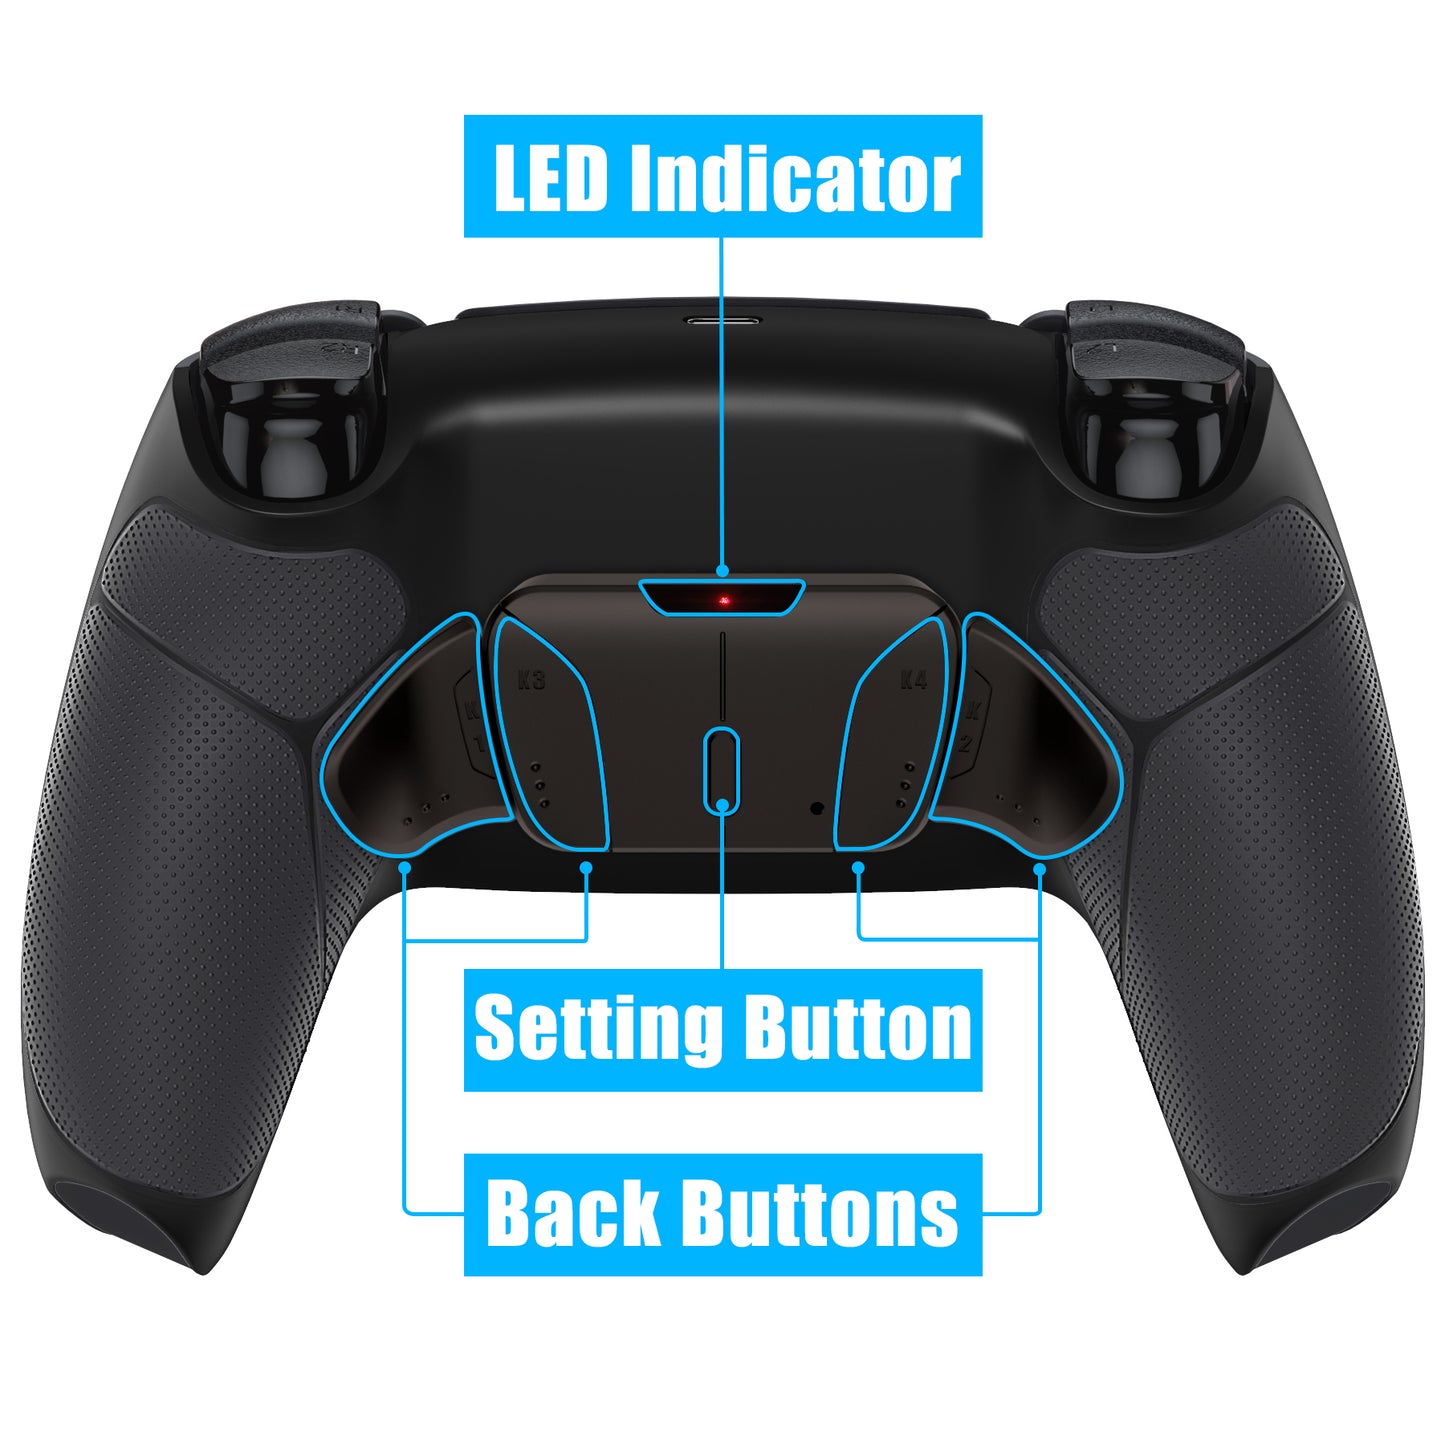 eXtremeRate Retail Rubberized Black Remappable Real Metal Buttons (RMB) Version RISE4 Remap Kit for PS5 Controller BDM 010 & BDM 020, Upgrade Board & Redesigned Back Shell & 4 Back Buttons for PS5 Controller - YPFJ7001